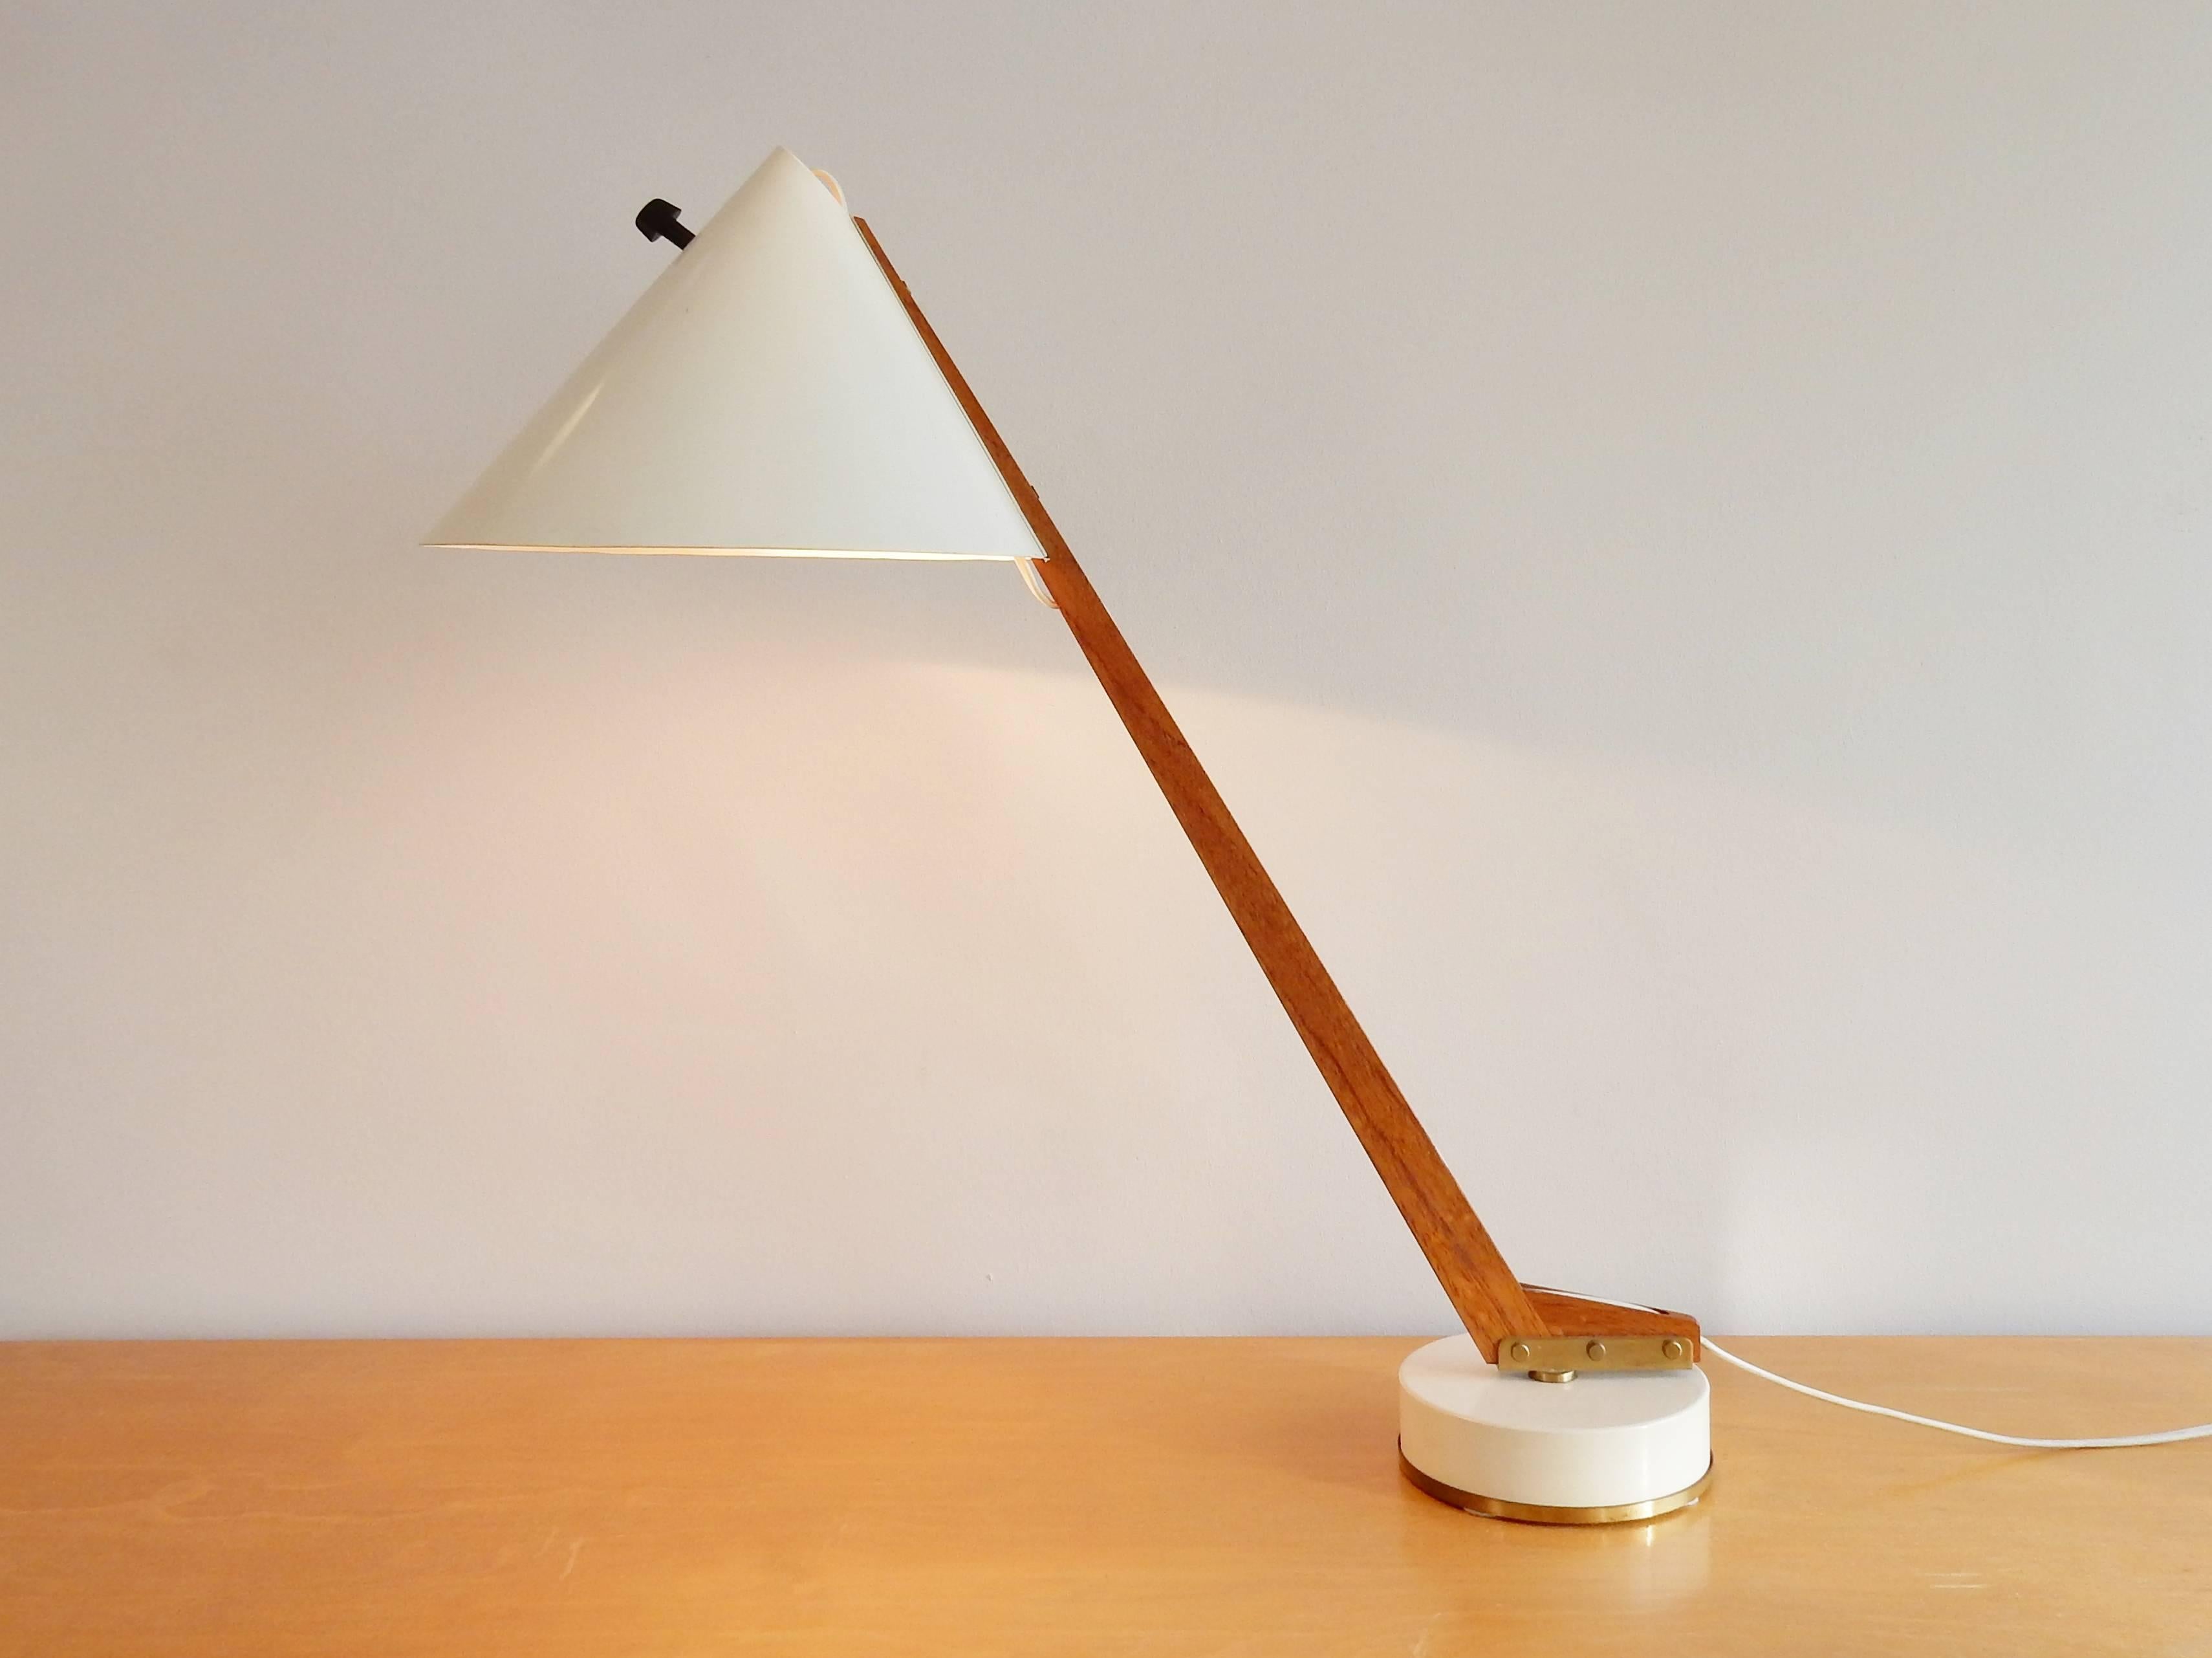 This desk lamp is a very goodlooking item. The combination of materials, colors and design are fascinating. A design by Hans-Agne Jakobsson from the 1950s.
The light can be swiveled for easy adjustment to the position needed. The wiring is very